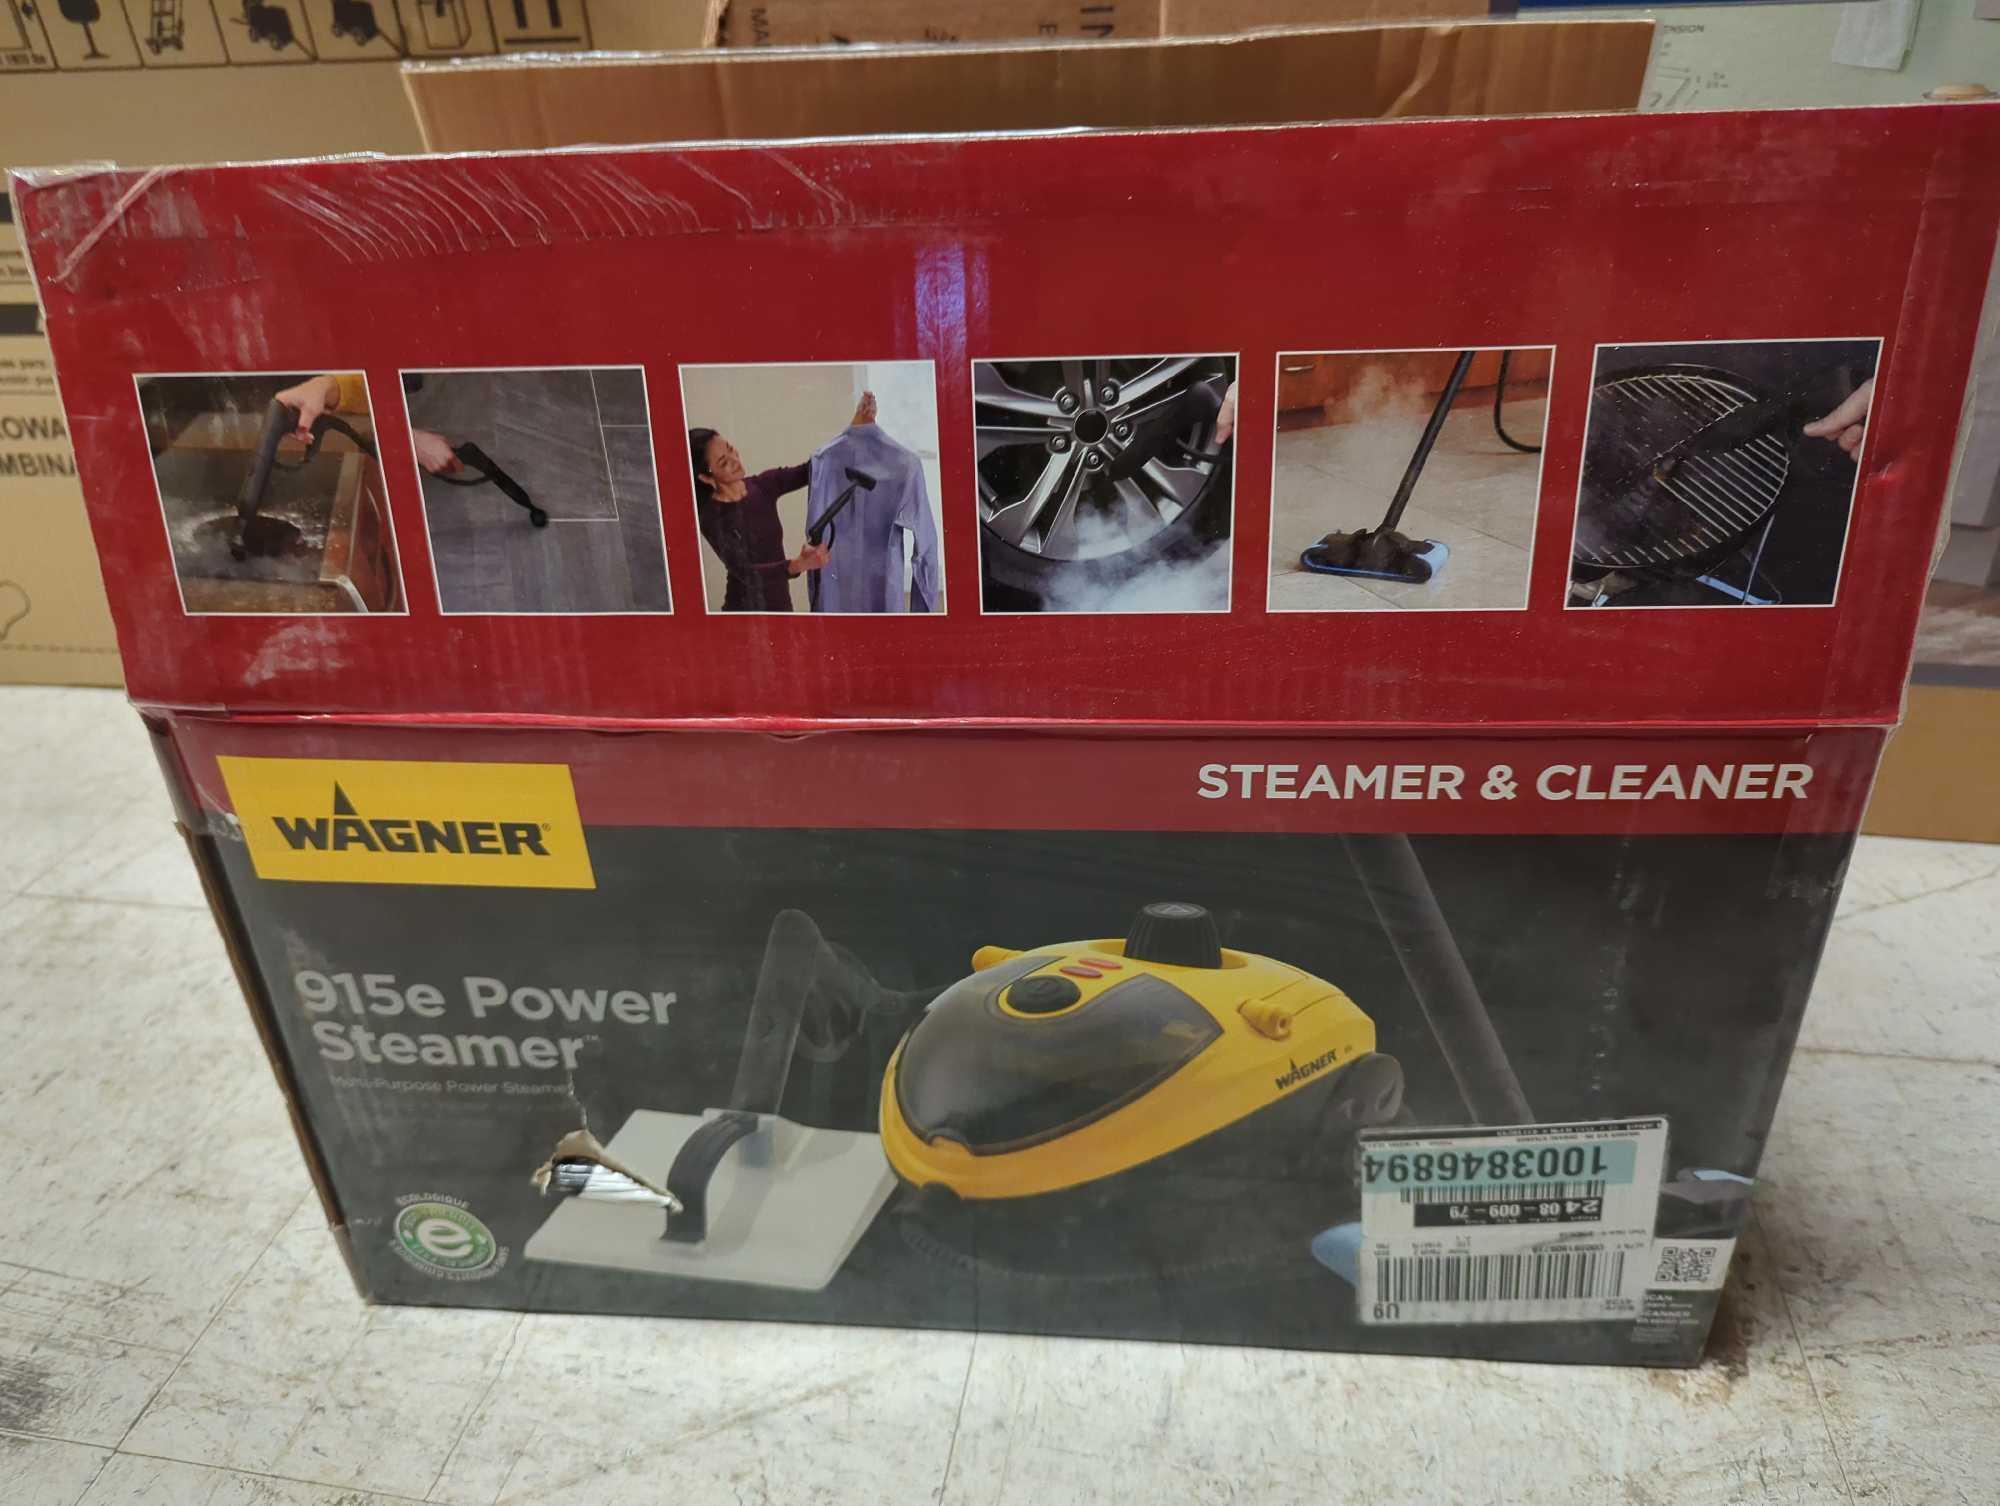 Wagner 915e Multi-Purpose On-Demand Steam Cleaner and Wallpaper remover, Appears to be Used in Open